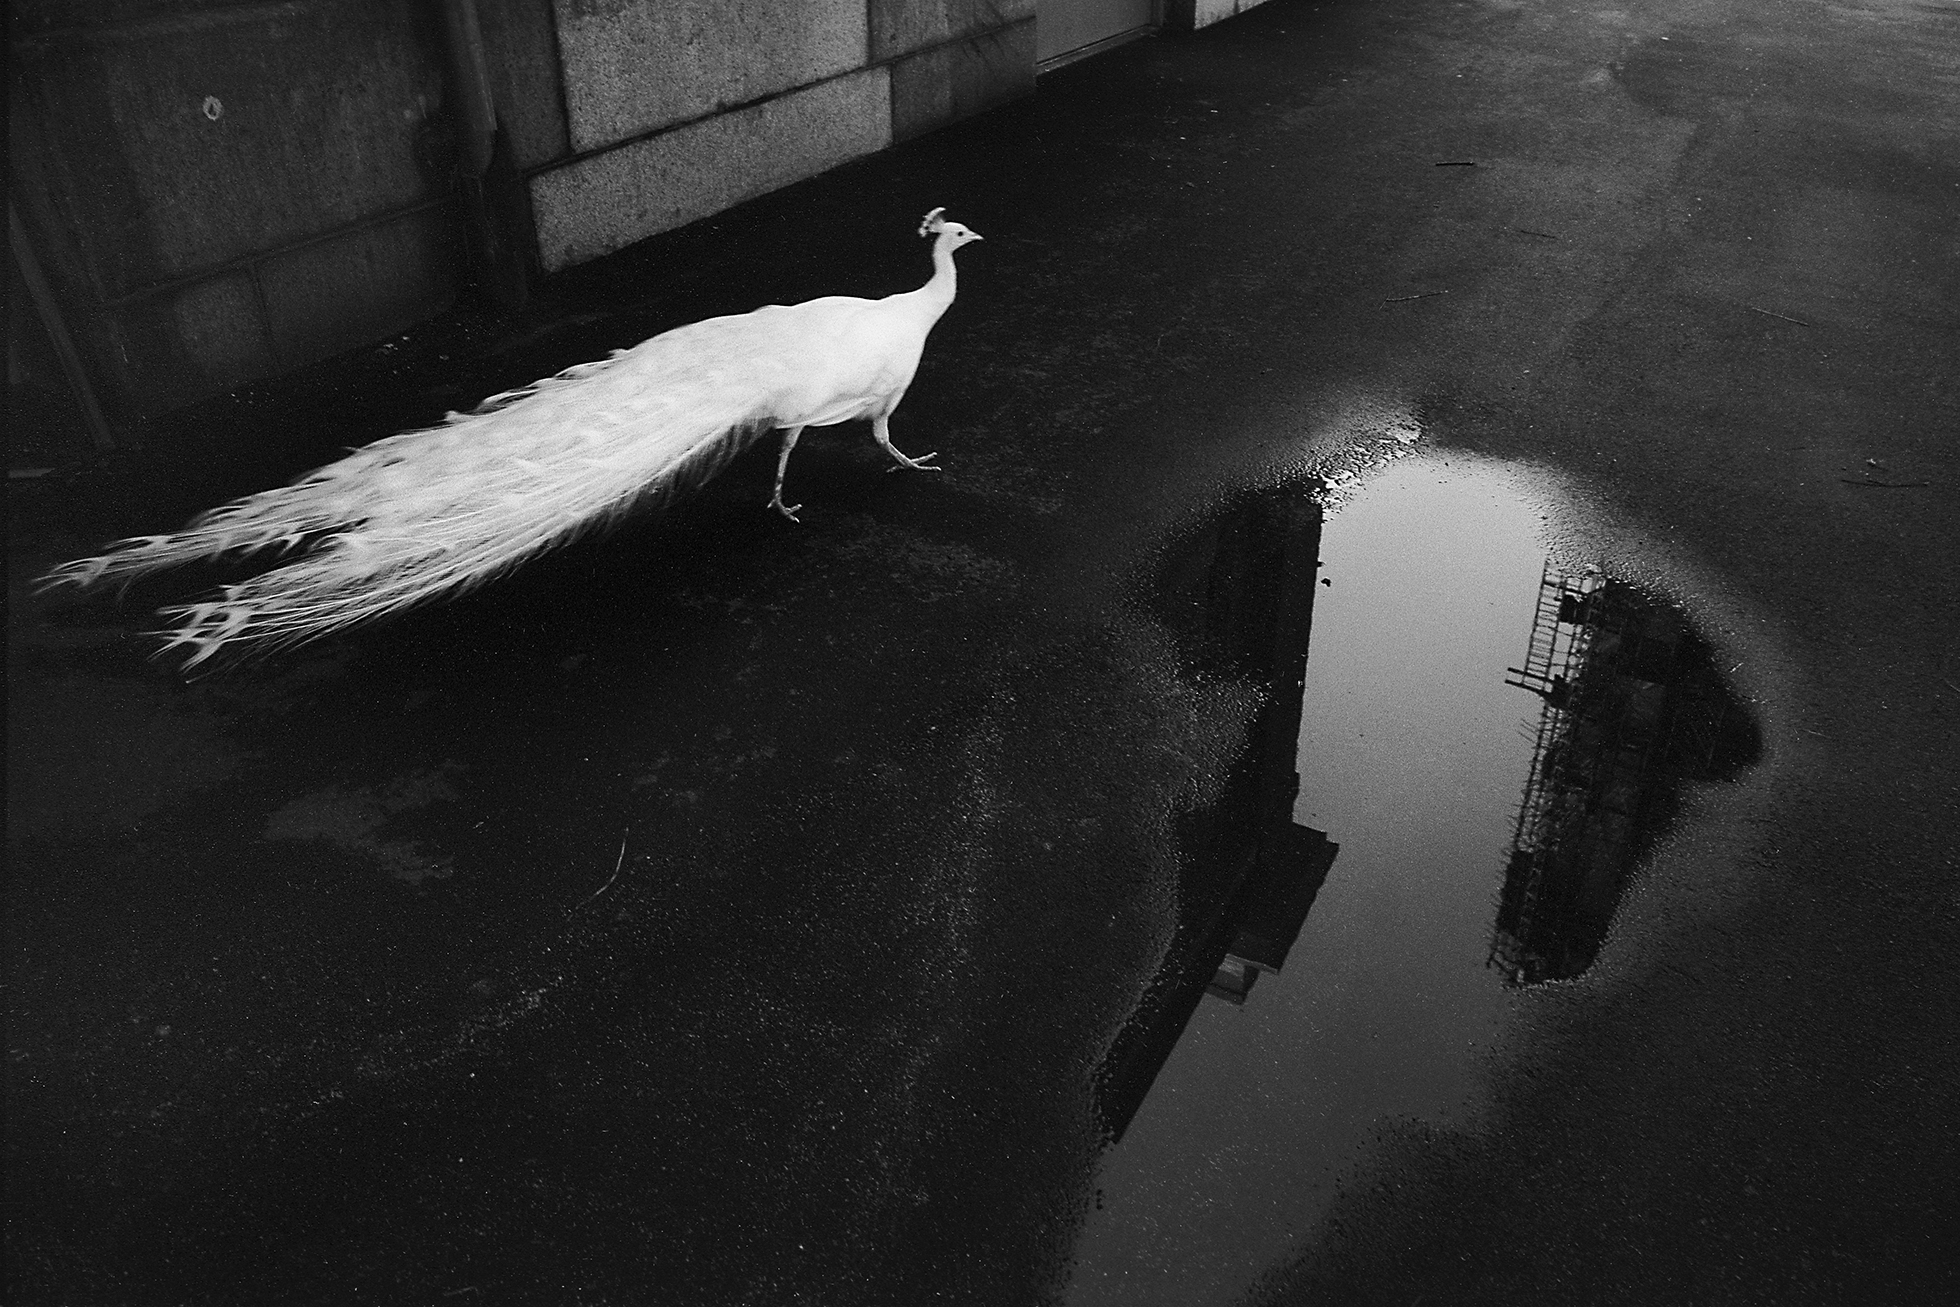 A white peacock walking on blacktop next to a puddle in the city.